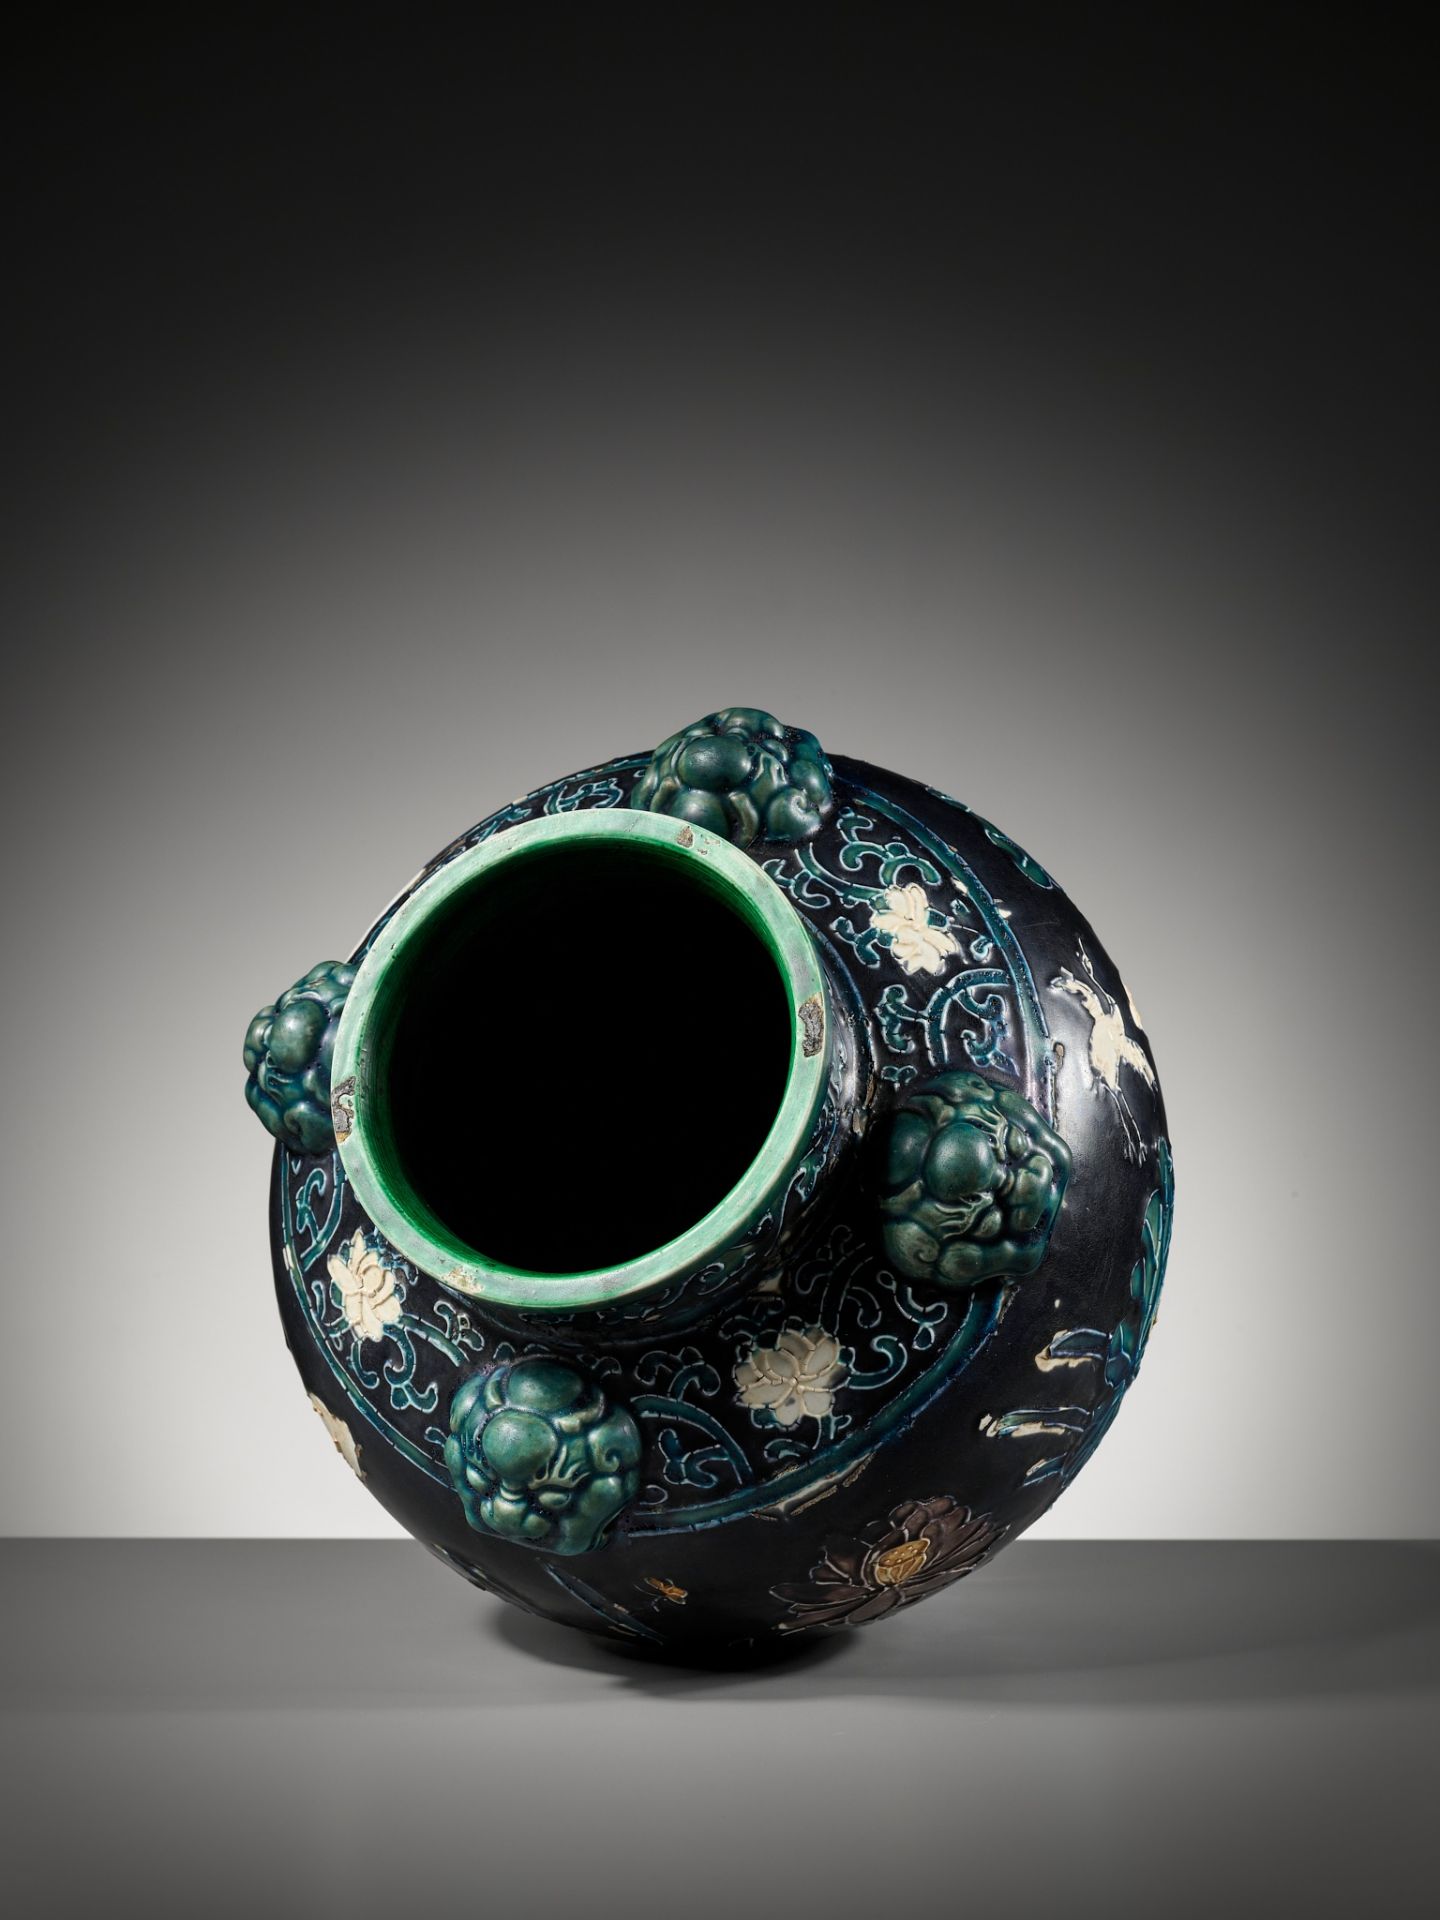 AN EARLY FAHUA-GLAZED 'LOTUS' JAR, GUAN, WITH FOUR LION-MASK HANDLES, MING DYNASTY - Image 13 of 14